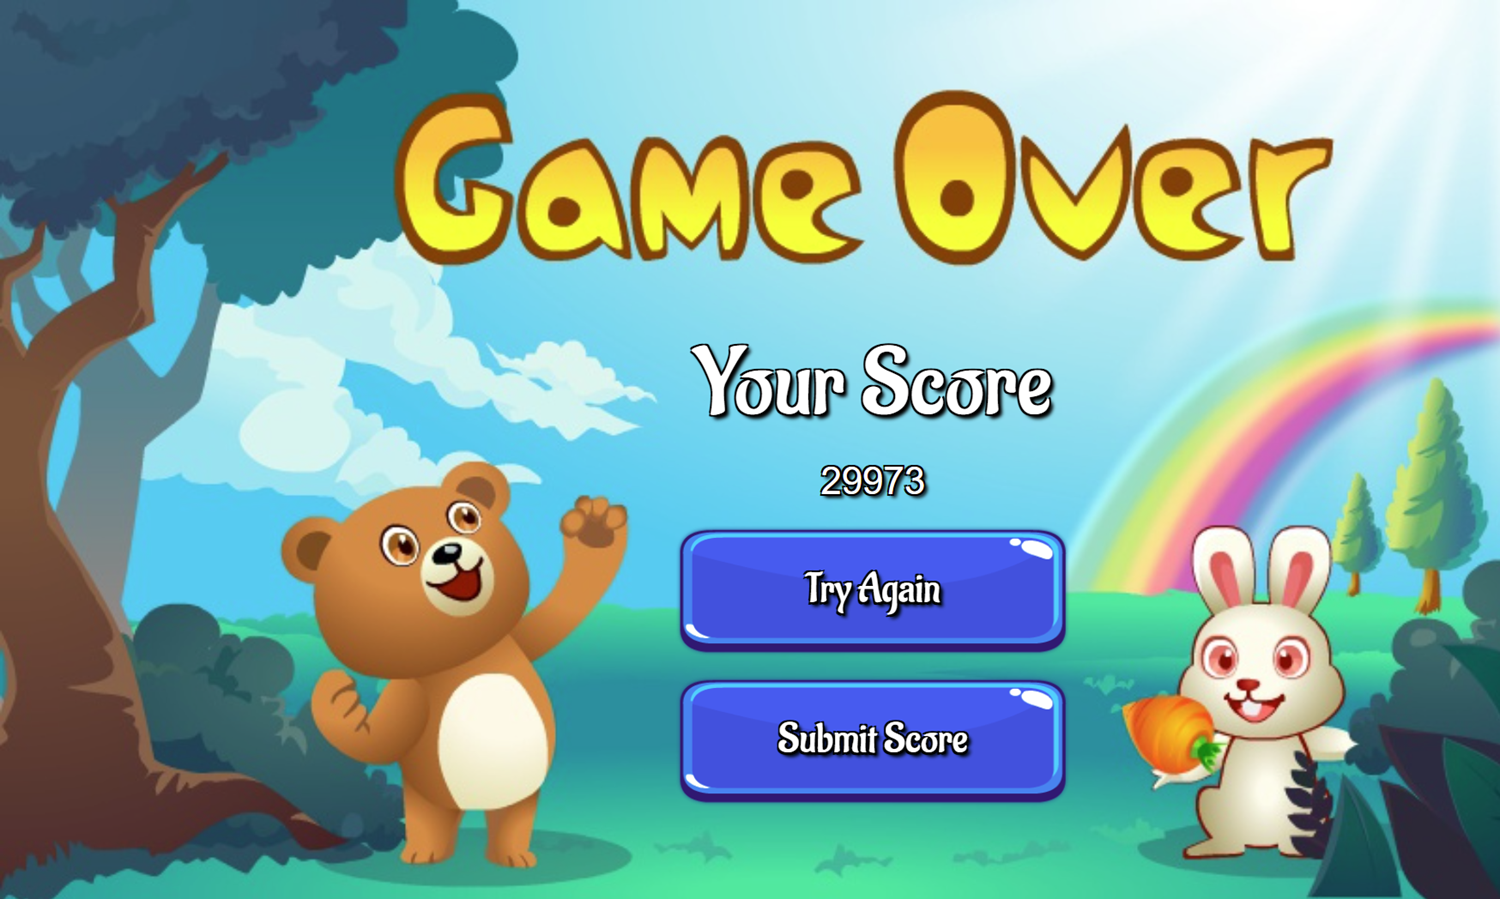 Feed the Animals Game Over Screen Screenshot.